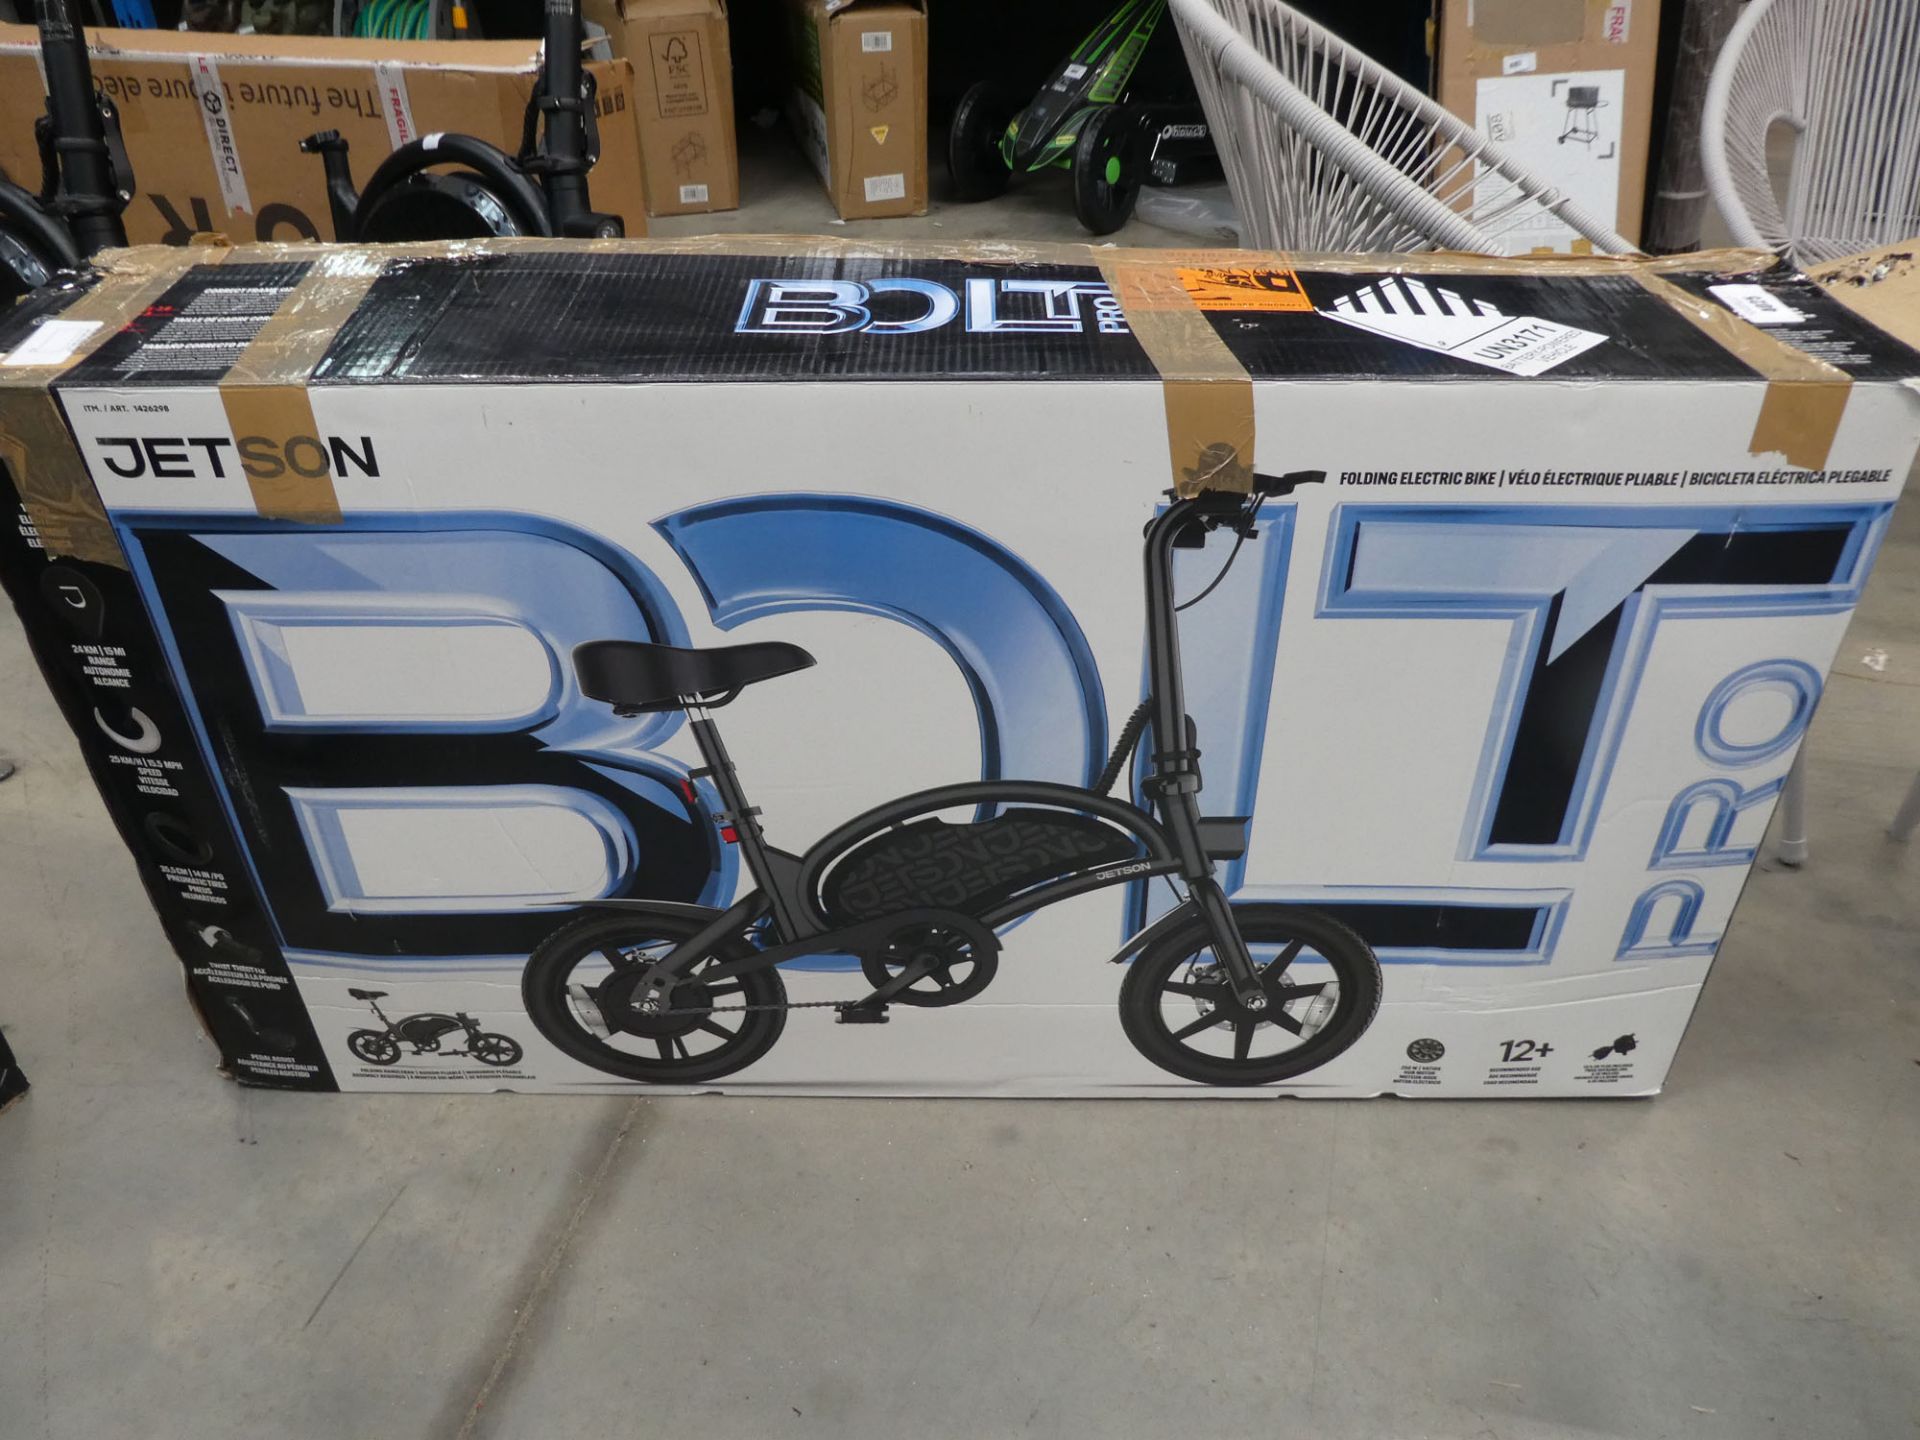 Boxed Jetson Bolt pro electric bike with charger